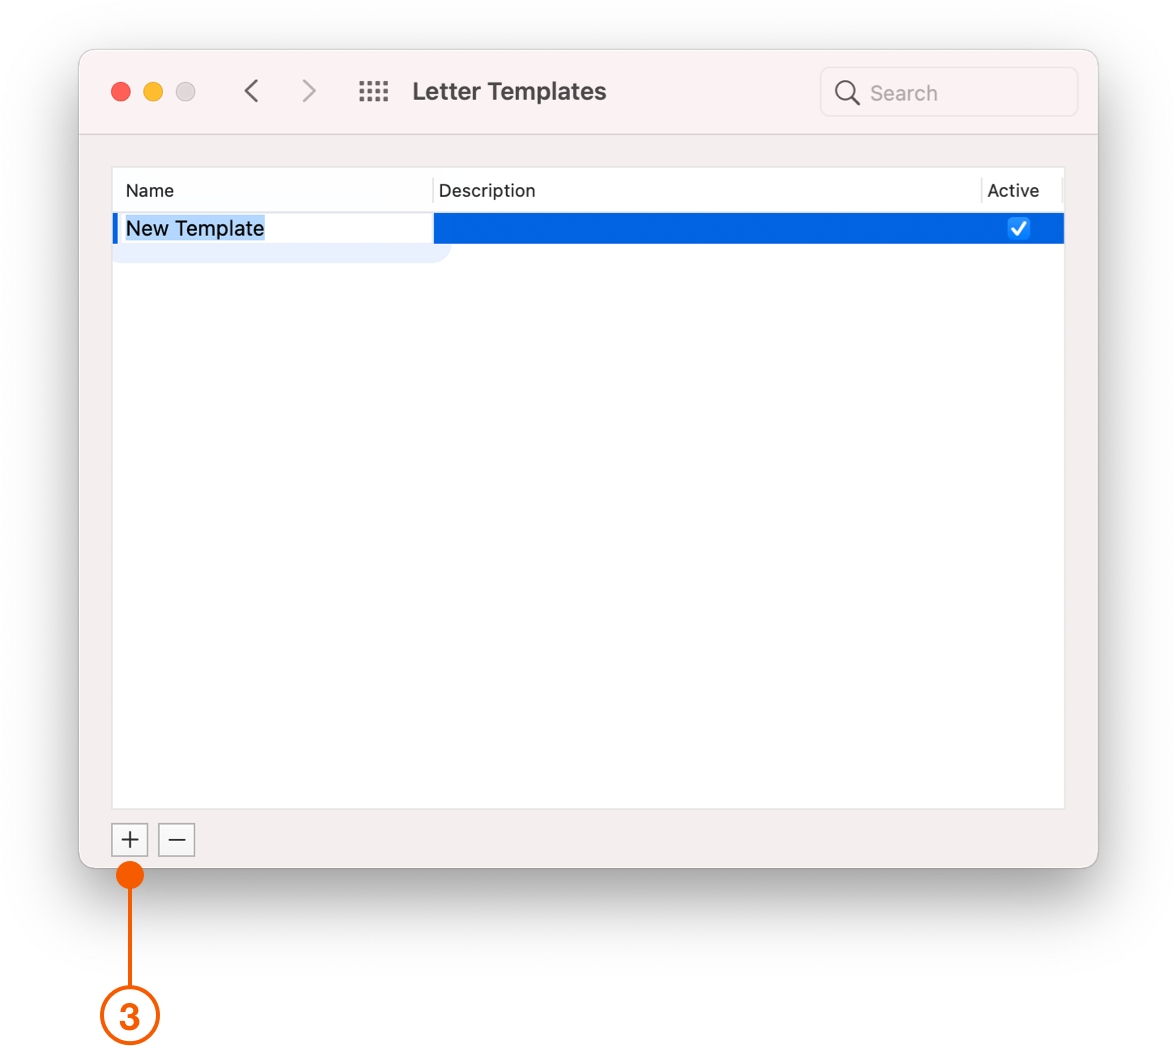 Letter Templates preferences showing New Template